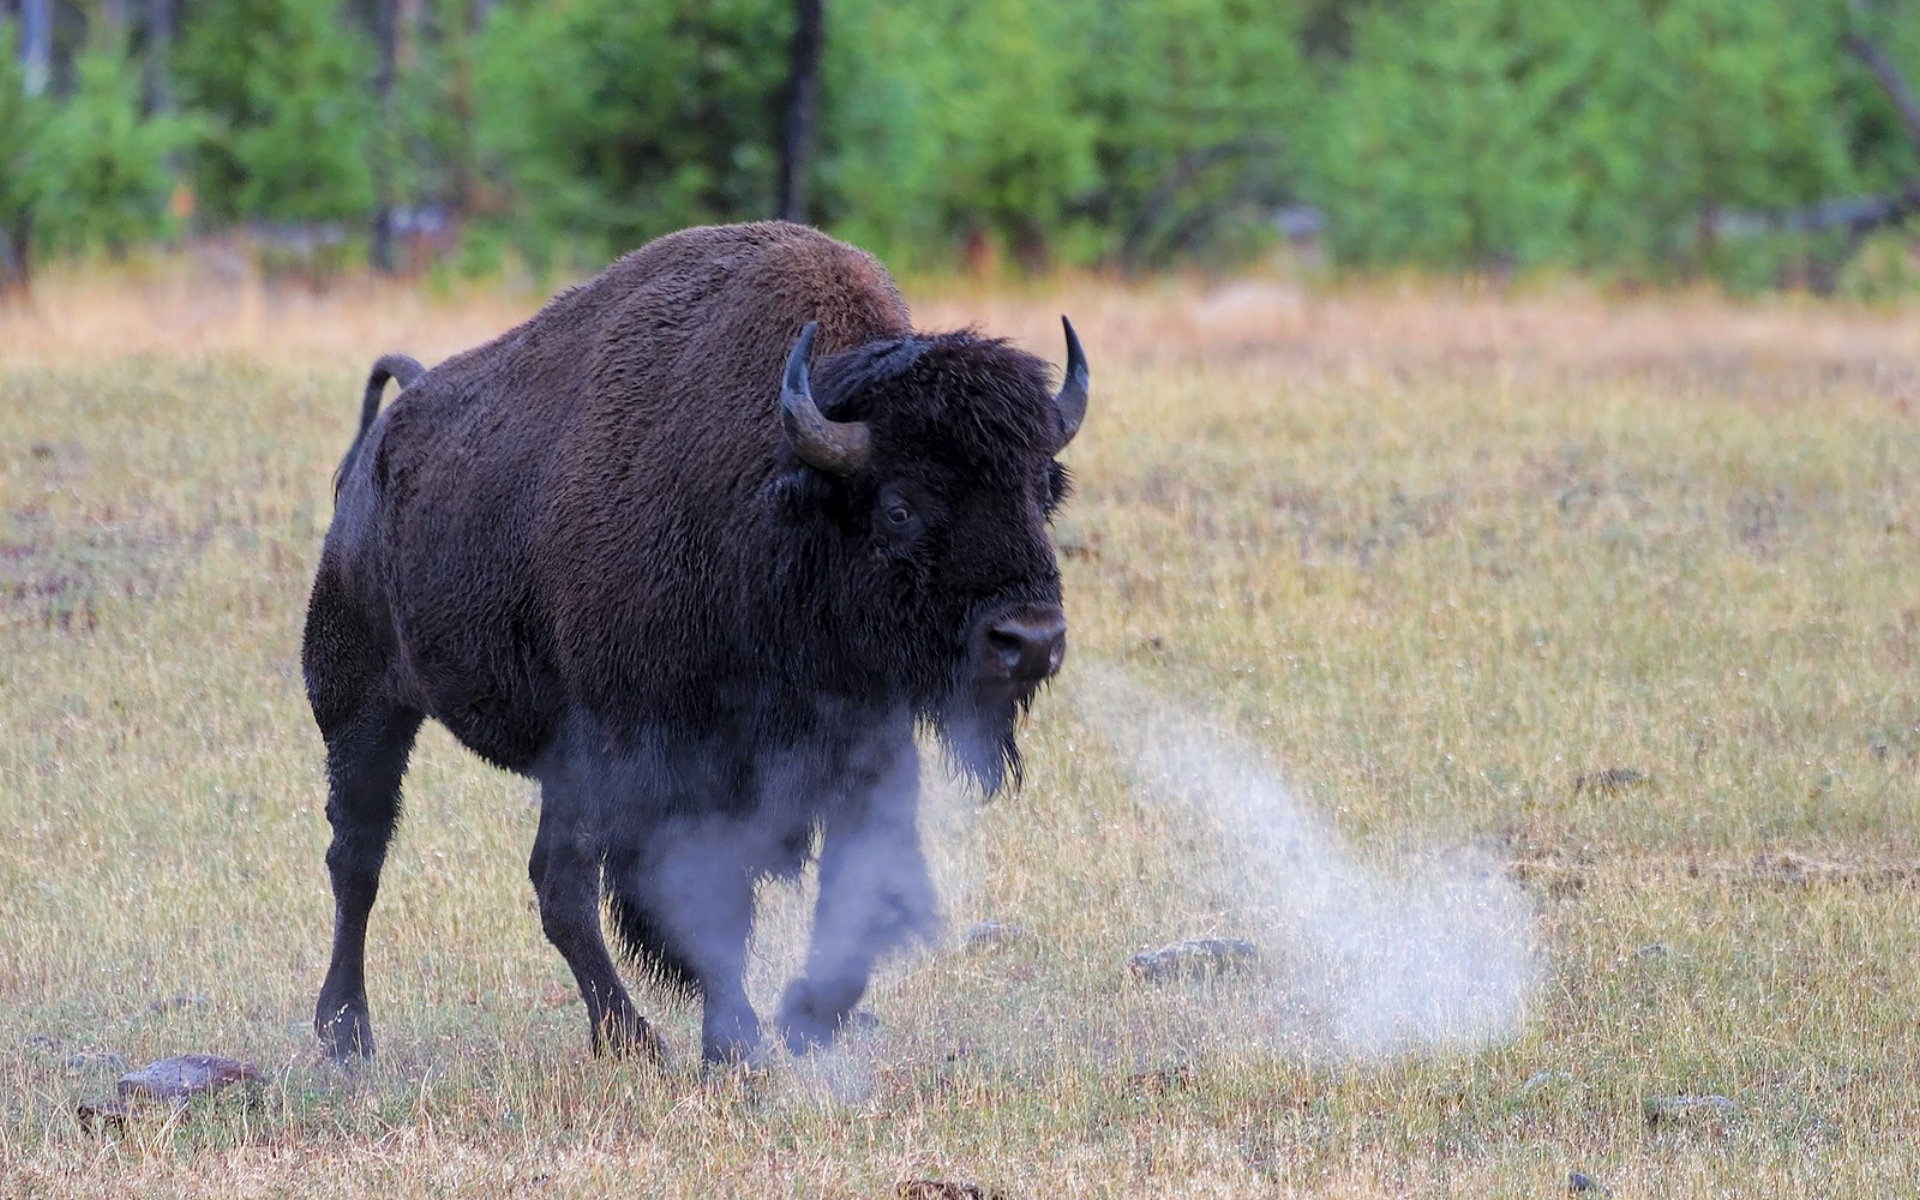 HD Bison Wallpaper Full Pictures